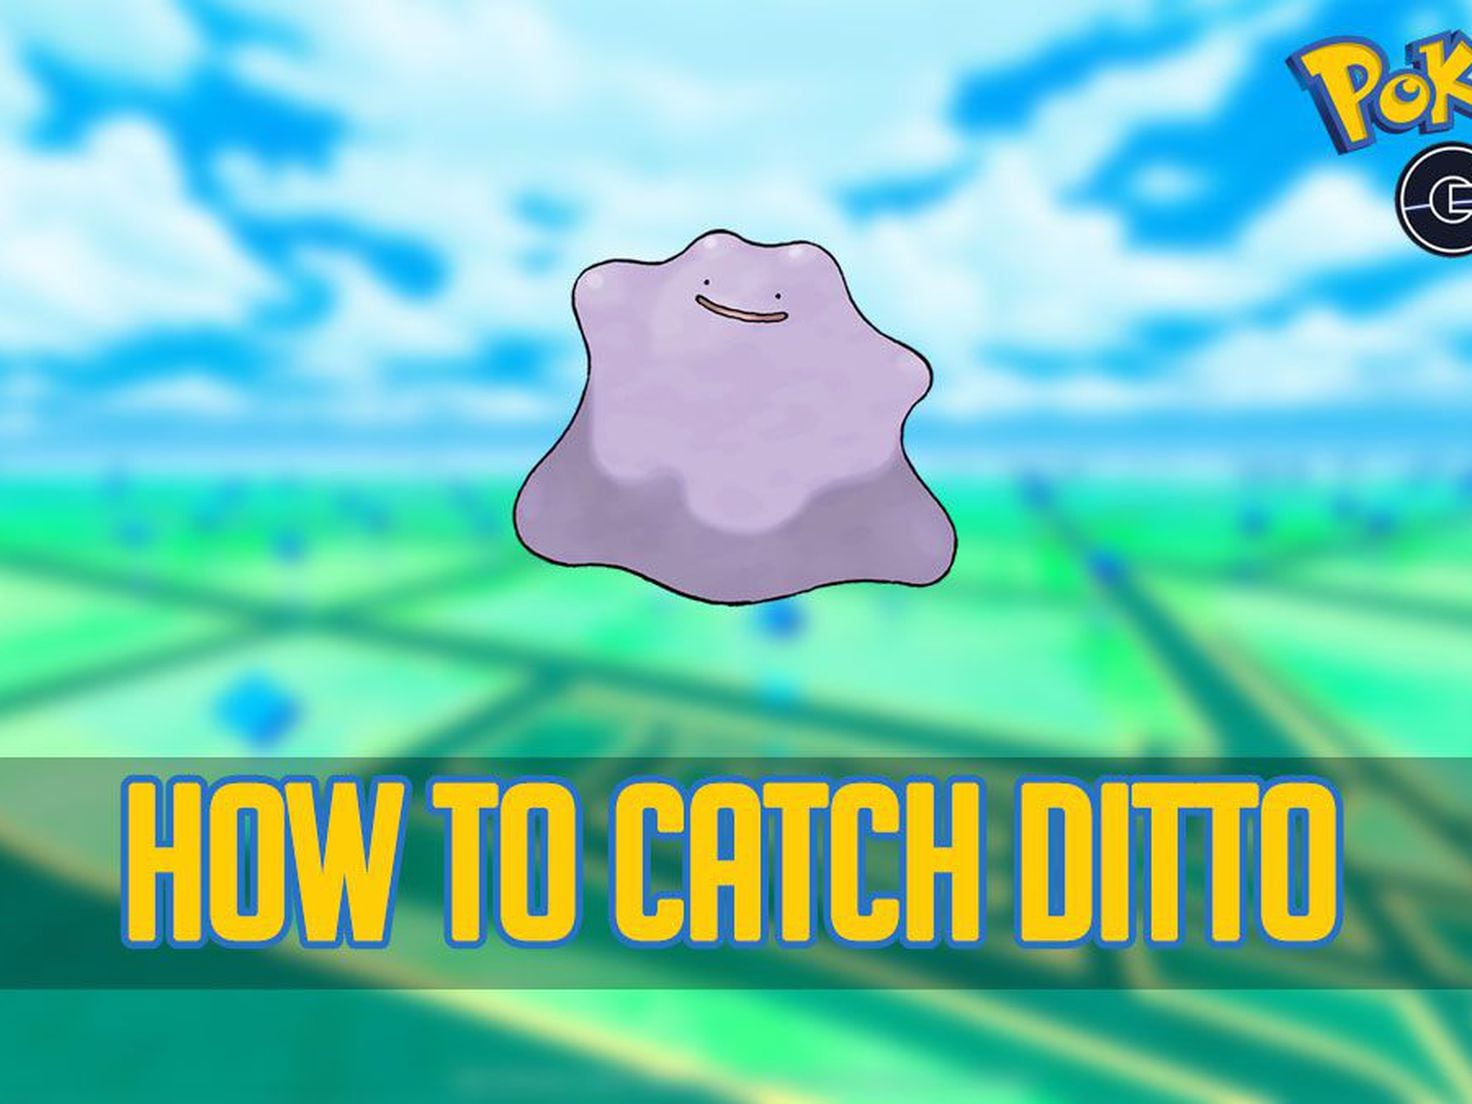 Pokémon by Review: #132: Ditto